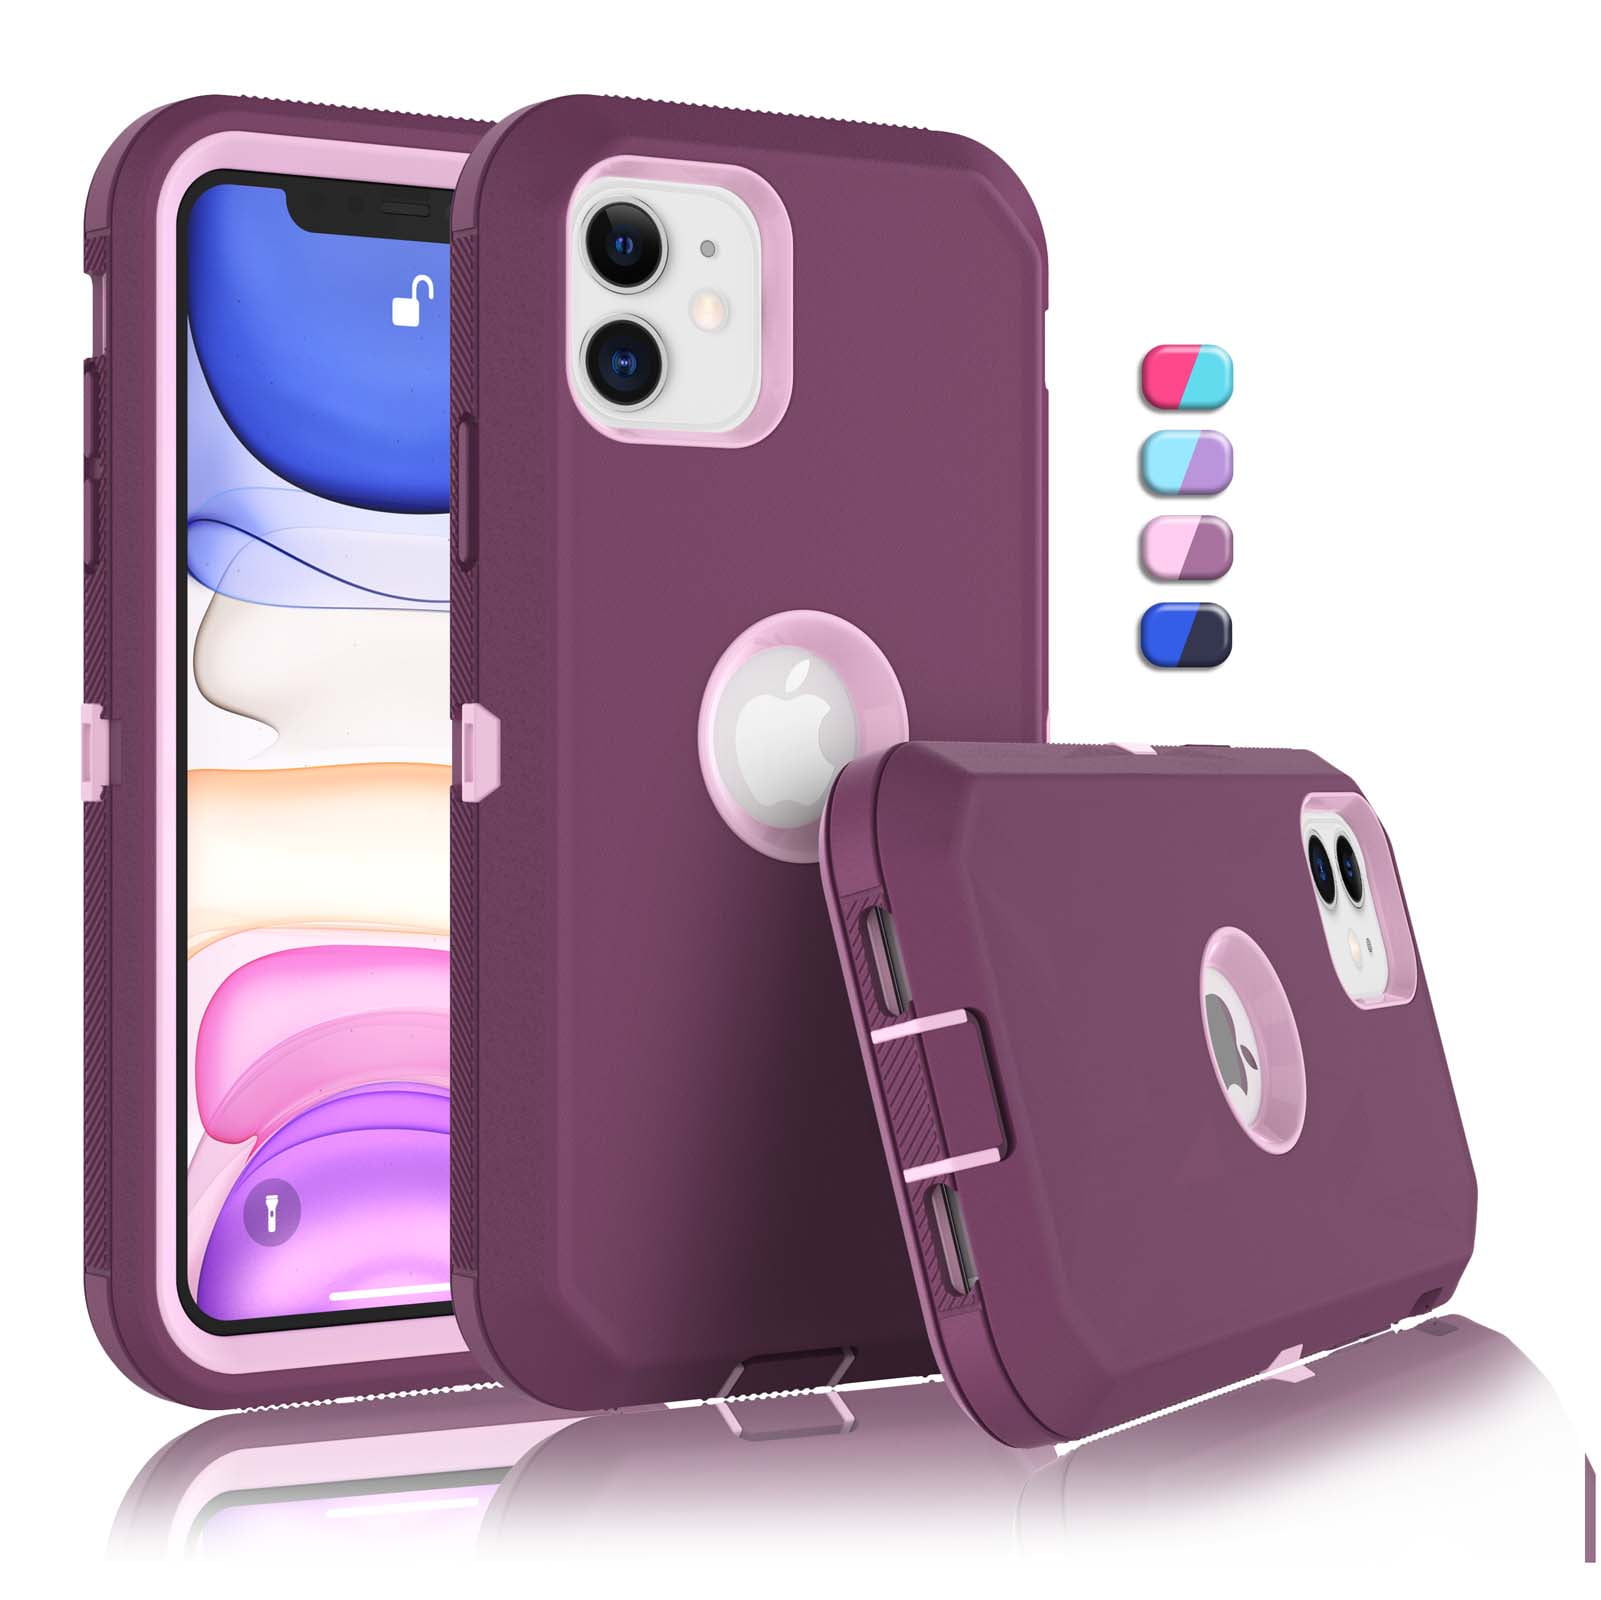 IPhone 11 Cases Sturdy Phone Case For Apple IPhone 11 6 1 Tekcoo Full Body Shockproof 